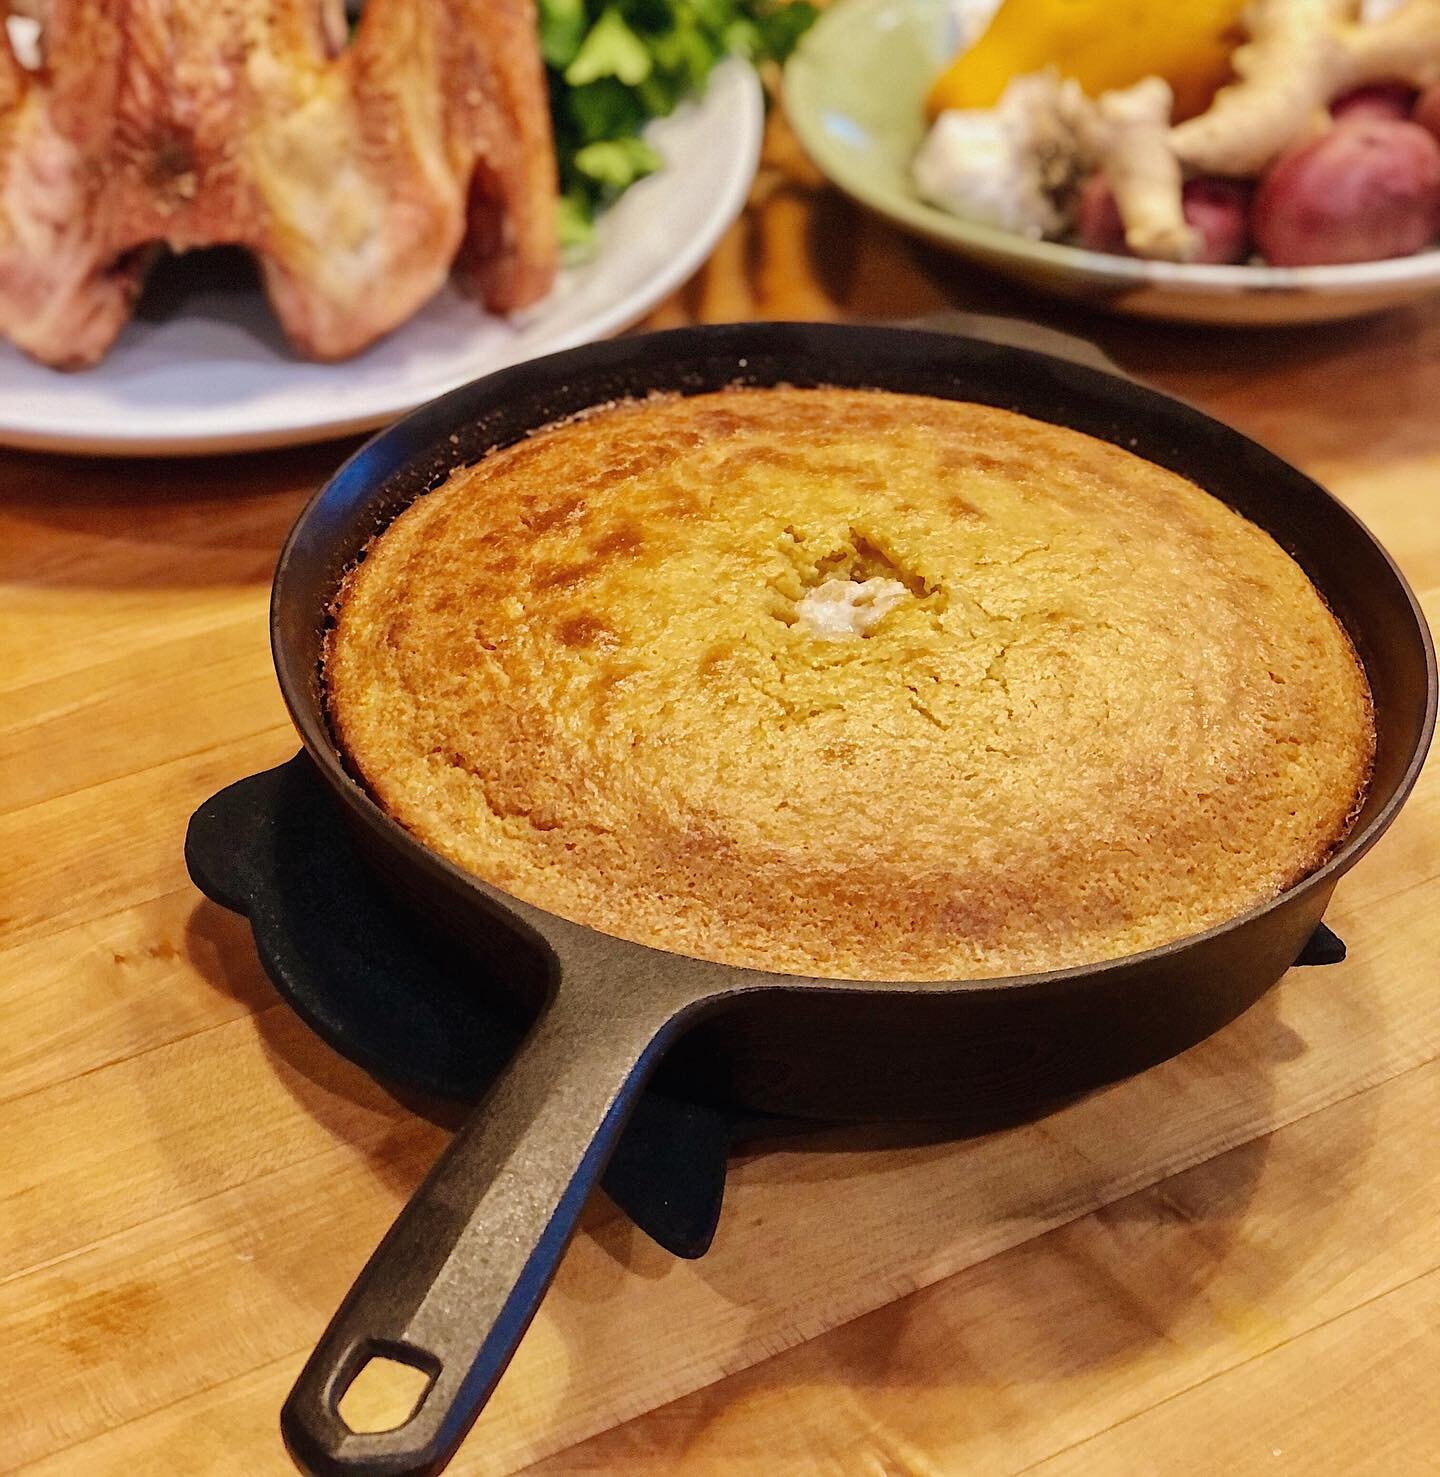 We&rsquo;re still stuffed!

This was our first holiday in the farmhouse and it was nothing short of spectacular.

Local heritage breed pastured turkey came out super moist, mashed purple sweet potatoes were stellar, but the cornbread stole the show.
